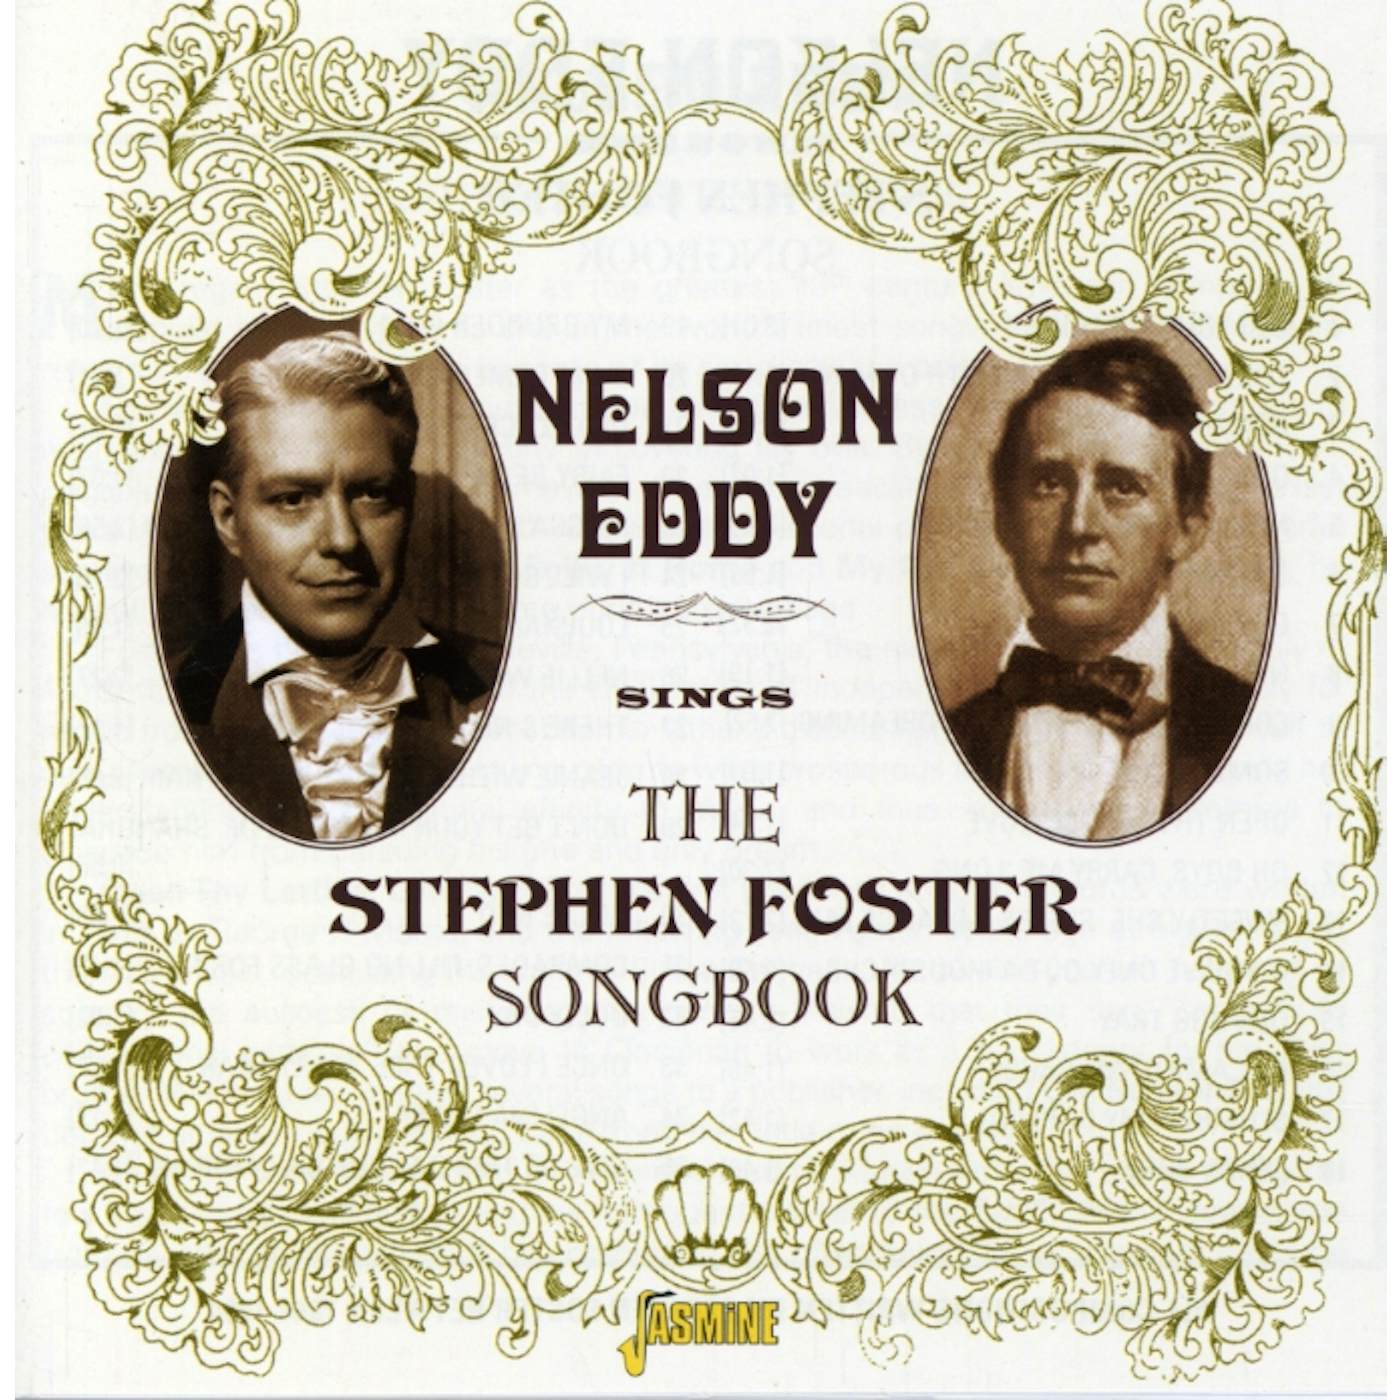 NELSON EDDY SINGS THE STEPHEN FOSTER SONGBOOK CD